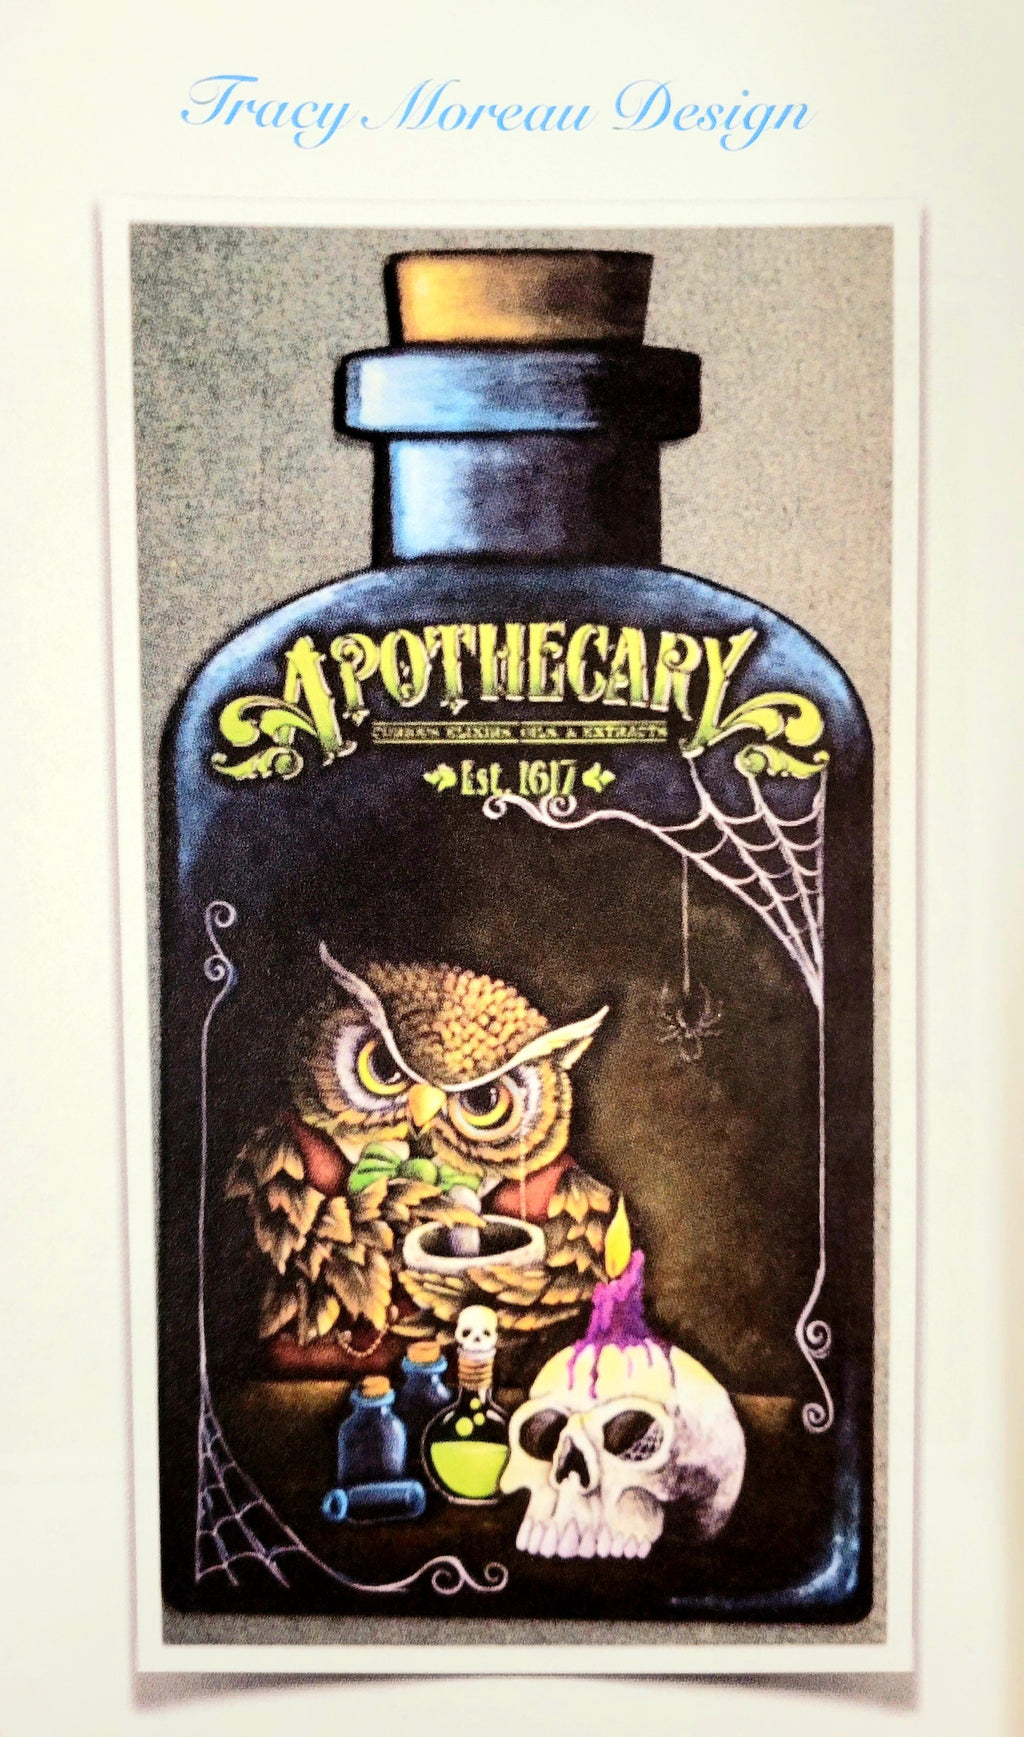 Dr. Hoot's Apothecary packet by Tracy Moreau